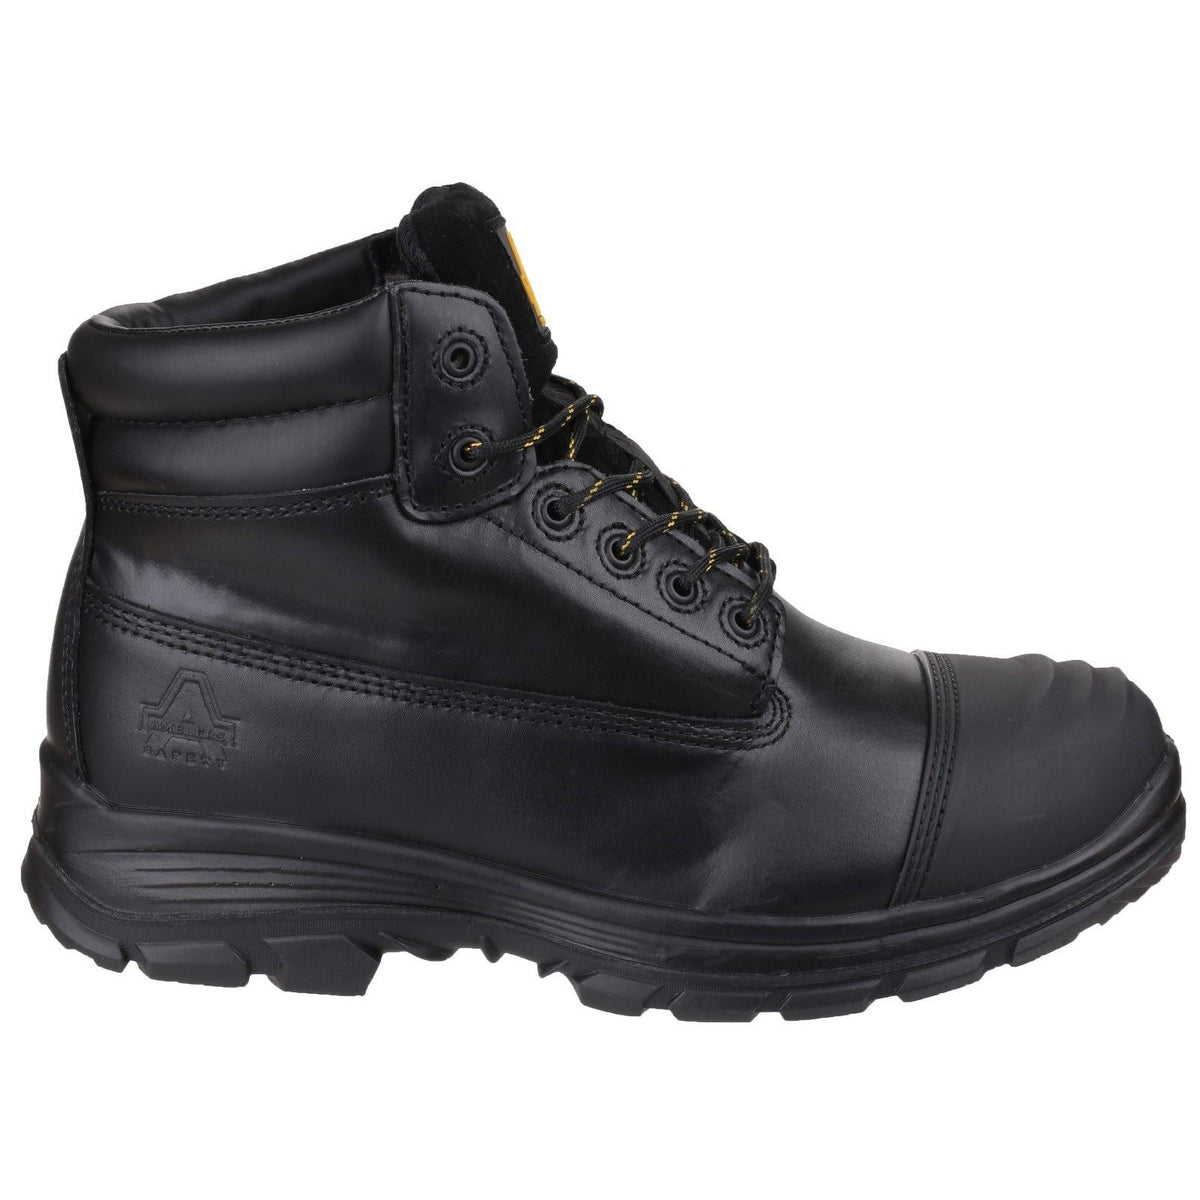 Amblers Safety FS301 Brecon Metatarsal Guard Safety Boots